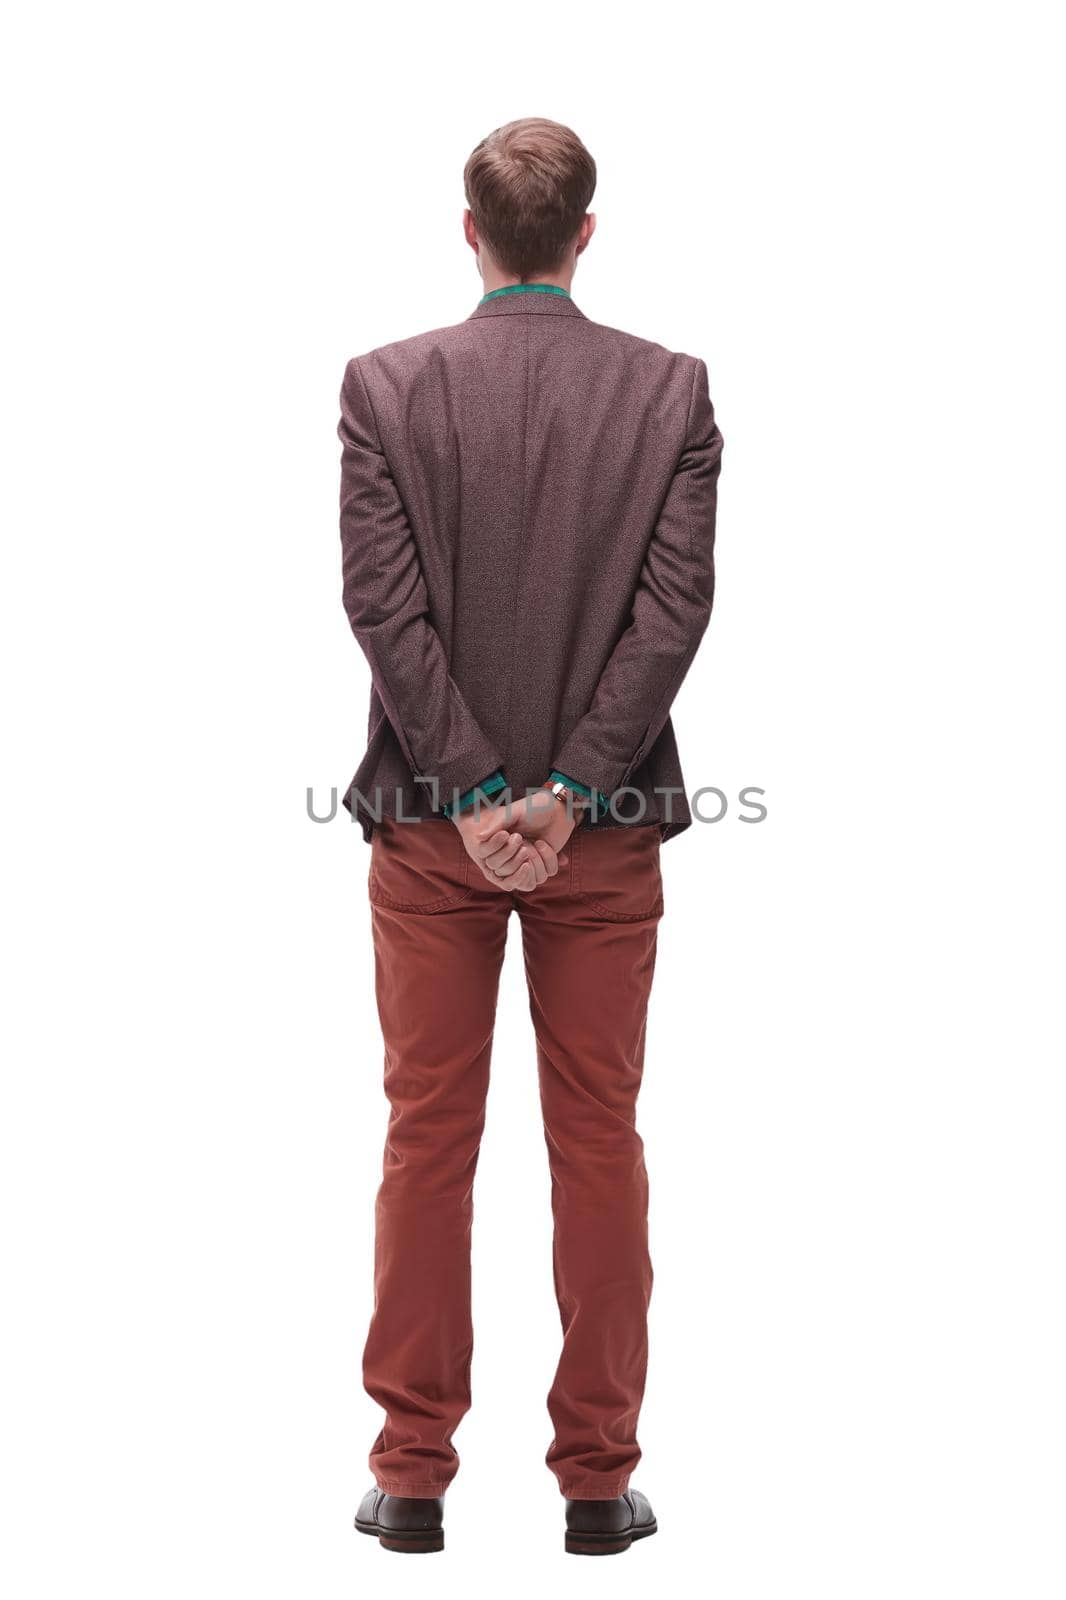 rear view. young man standing in front of white blank screen. isolated on white background